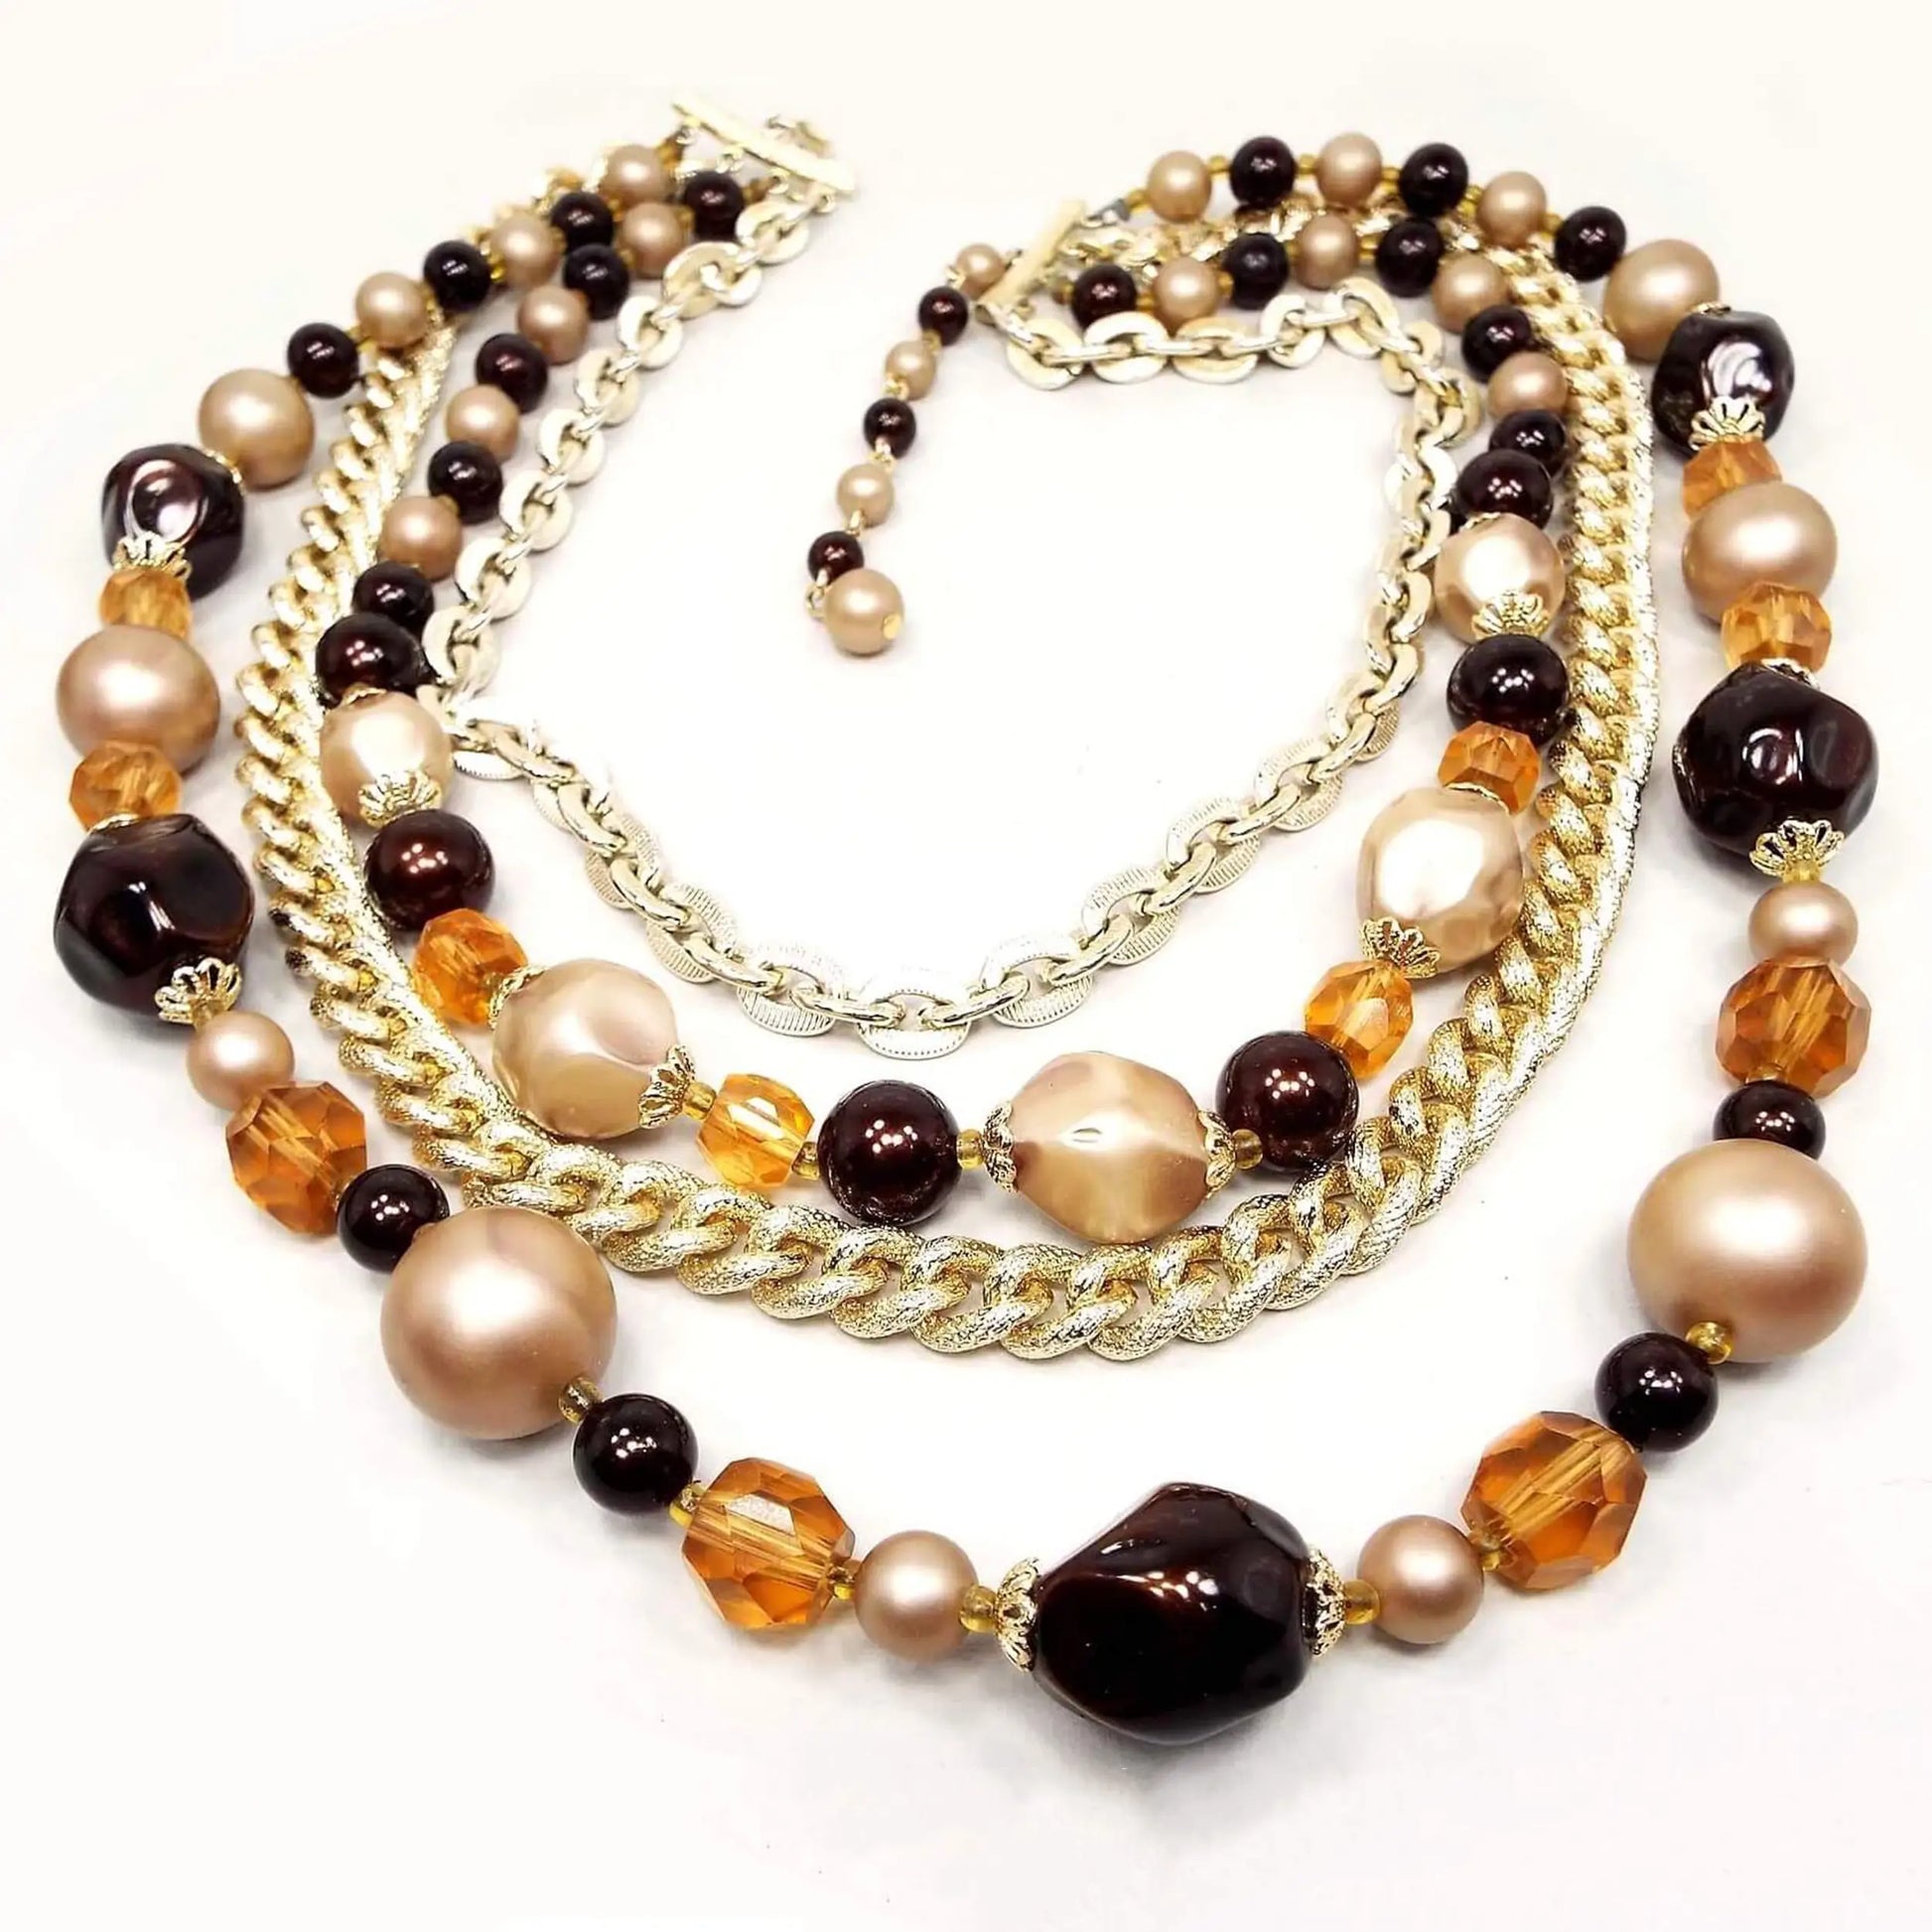 Front view of the Japanese Mid Century vintage multi strand beaded necklace. There are two strands of gold tone color chain and two strands of beads. The beads are chunky plastic, plastic faux pearl, and faceted glass beads in shades of orange, brown, and tan. There is a hook clasp at the end.